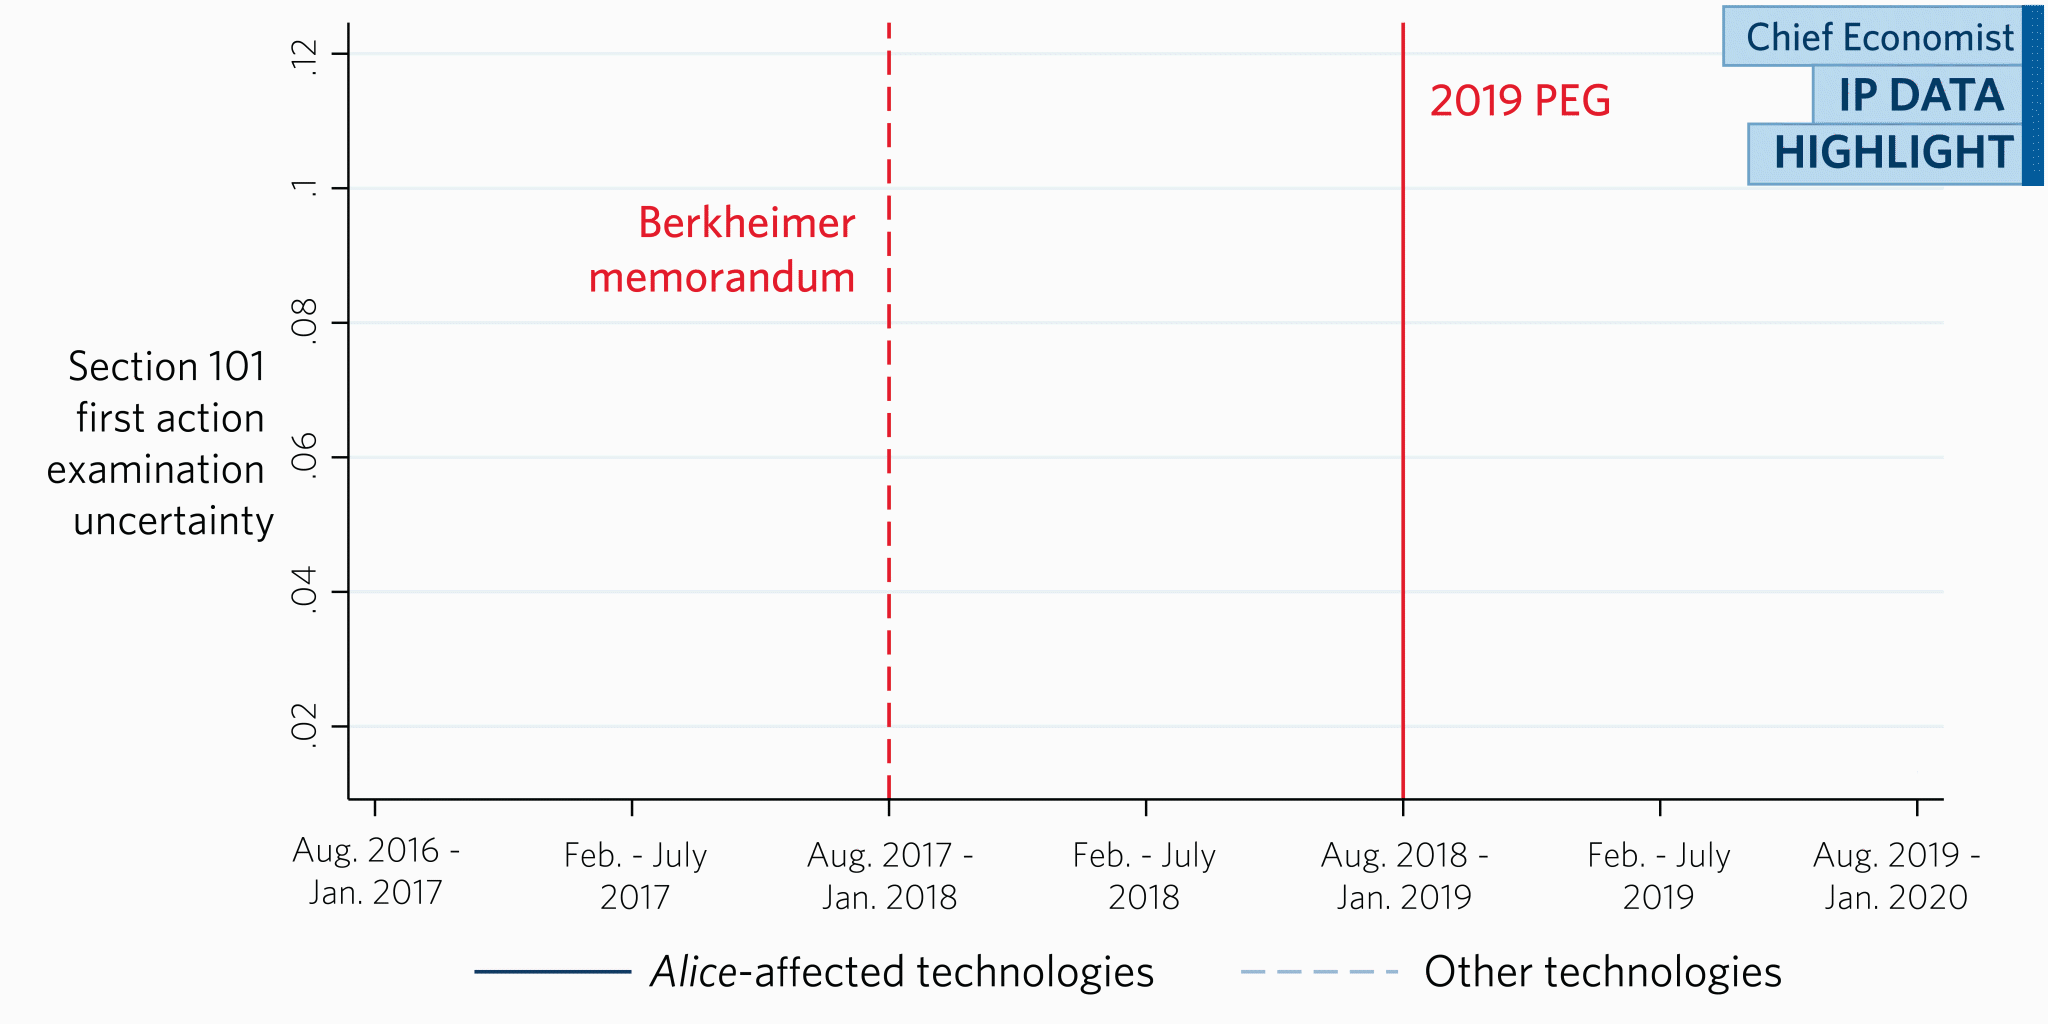 Line graph showing Section 101 examination uncertainty in Alice-affected and other technologies. Time is on the x-axis (ranging from the half year period Aug–Jan 2017 to the period Aug–Jan 2020), and Section 101 examination uncertainty is on the y-axis (ranging from .02 to .12). The figure has a vertical line at Aug–Jan 2018, marking the half-year directly before the Berkheimer memorandum, and a vertical line at Aug–Jan 2019, marking the half-year containing only a partial month of the 2019 PEG.